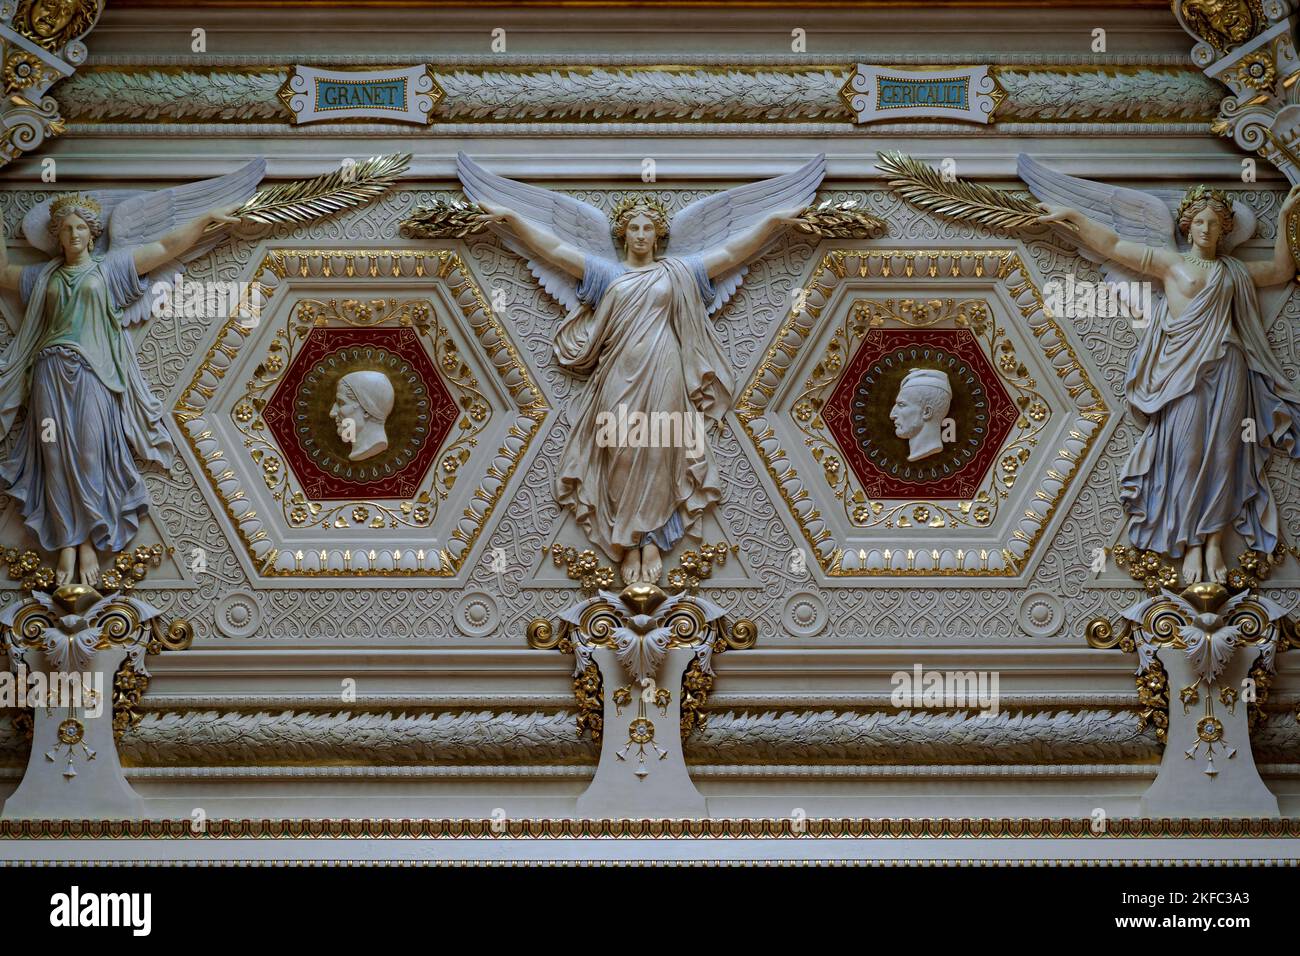 The classical architecture inside Versailles Palace, France Stock Photo